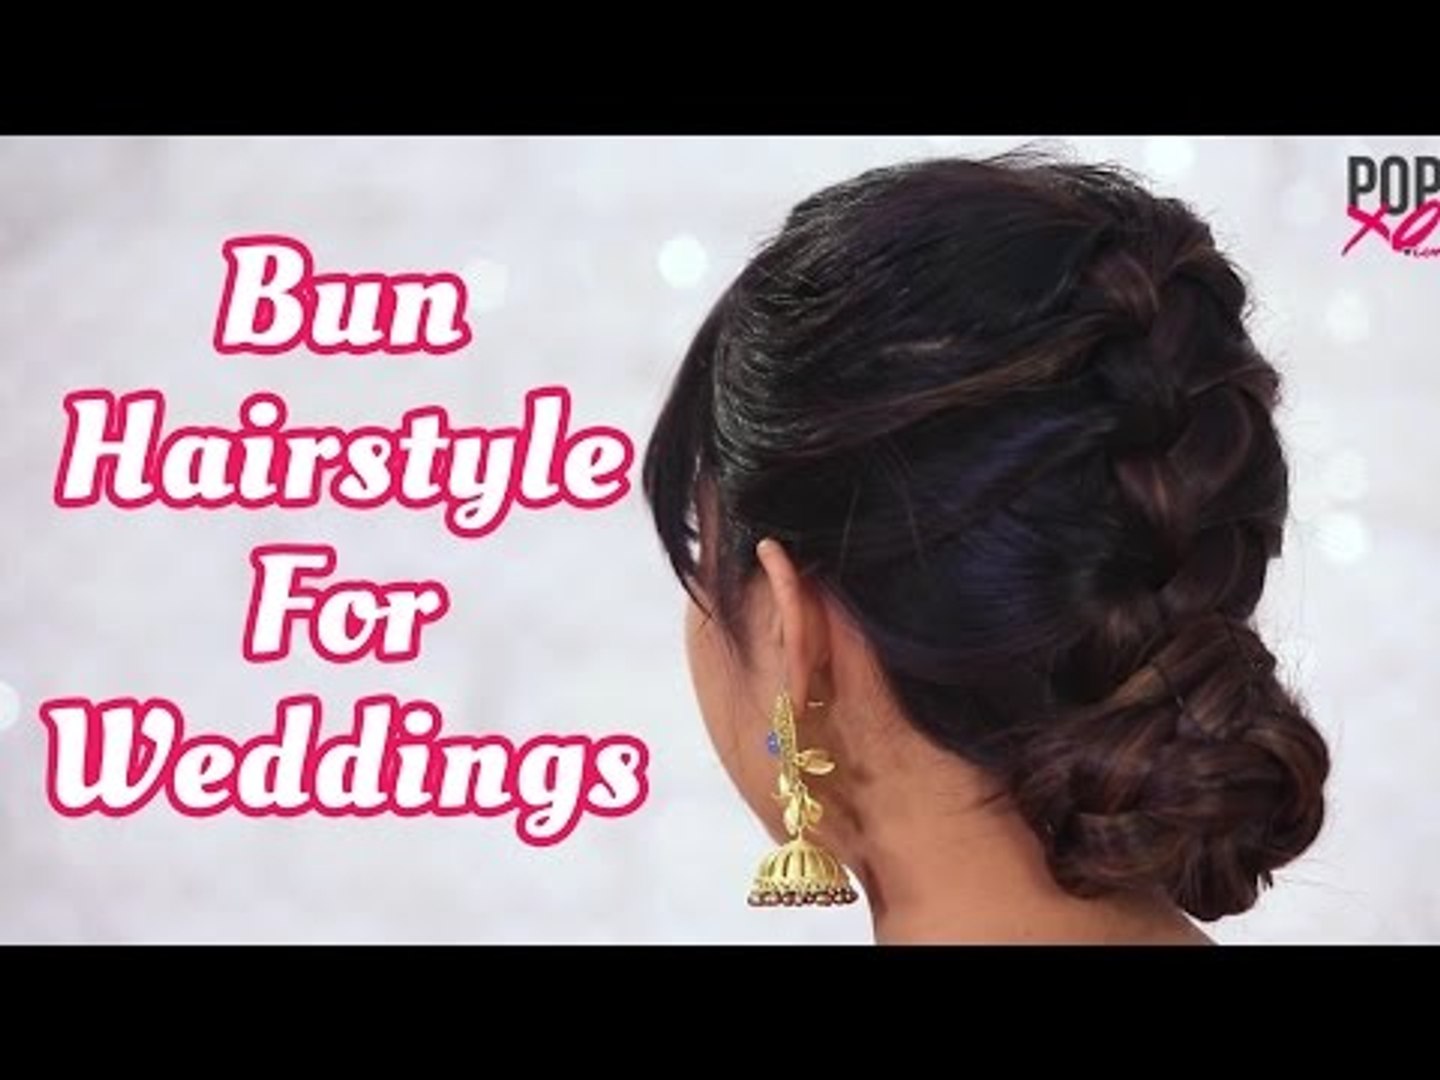 How To Make Bun Hairstyle With Indian Outfit | Wedding Guest Hairstyles -  POPxo - video Dailymotion